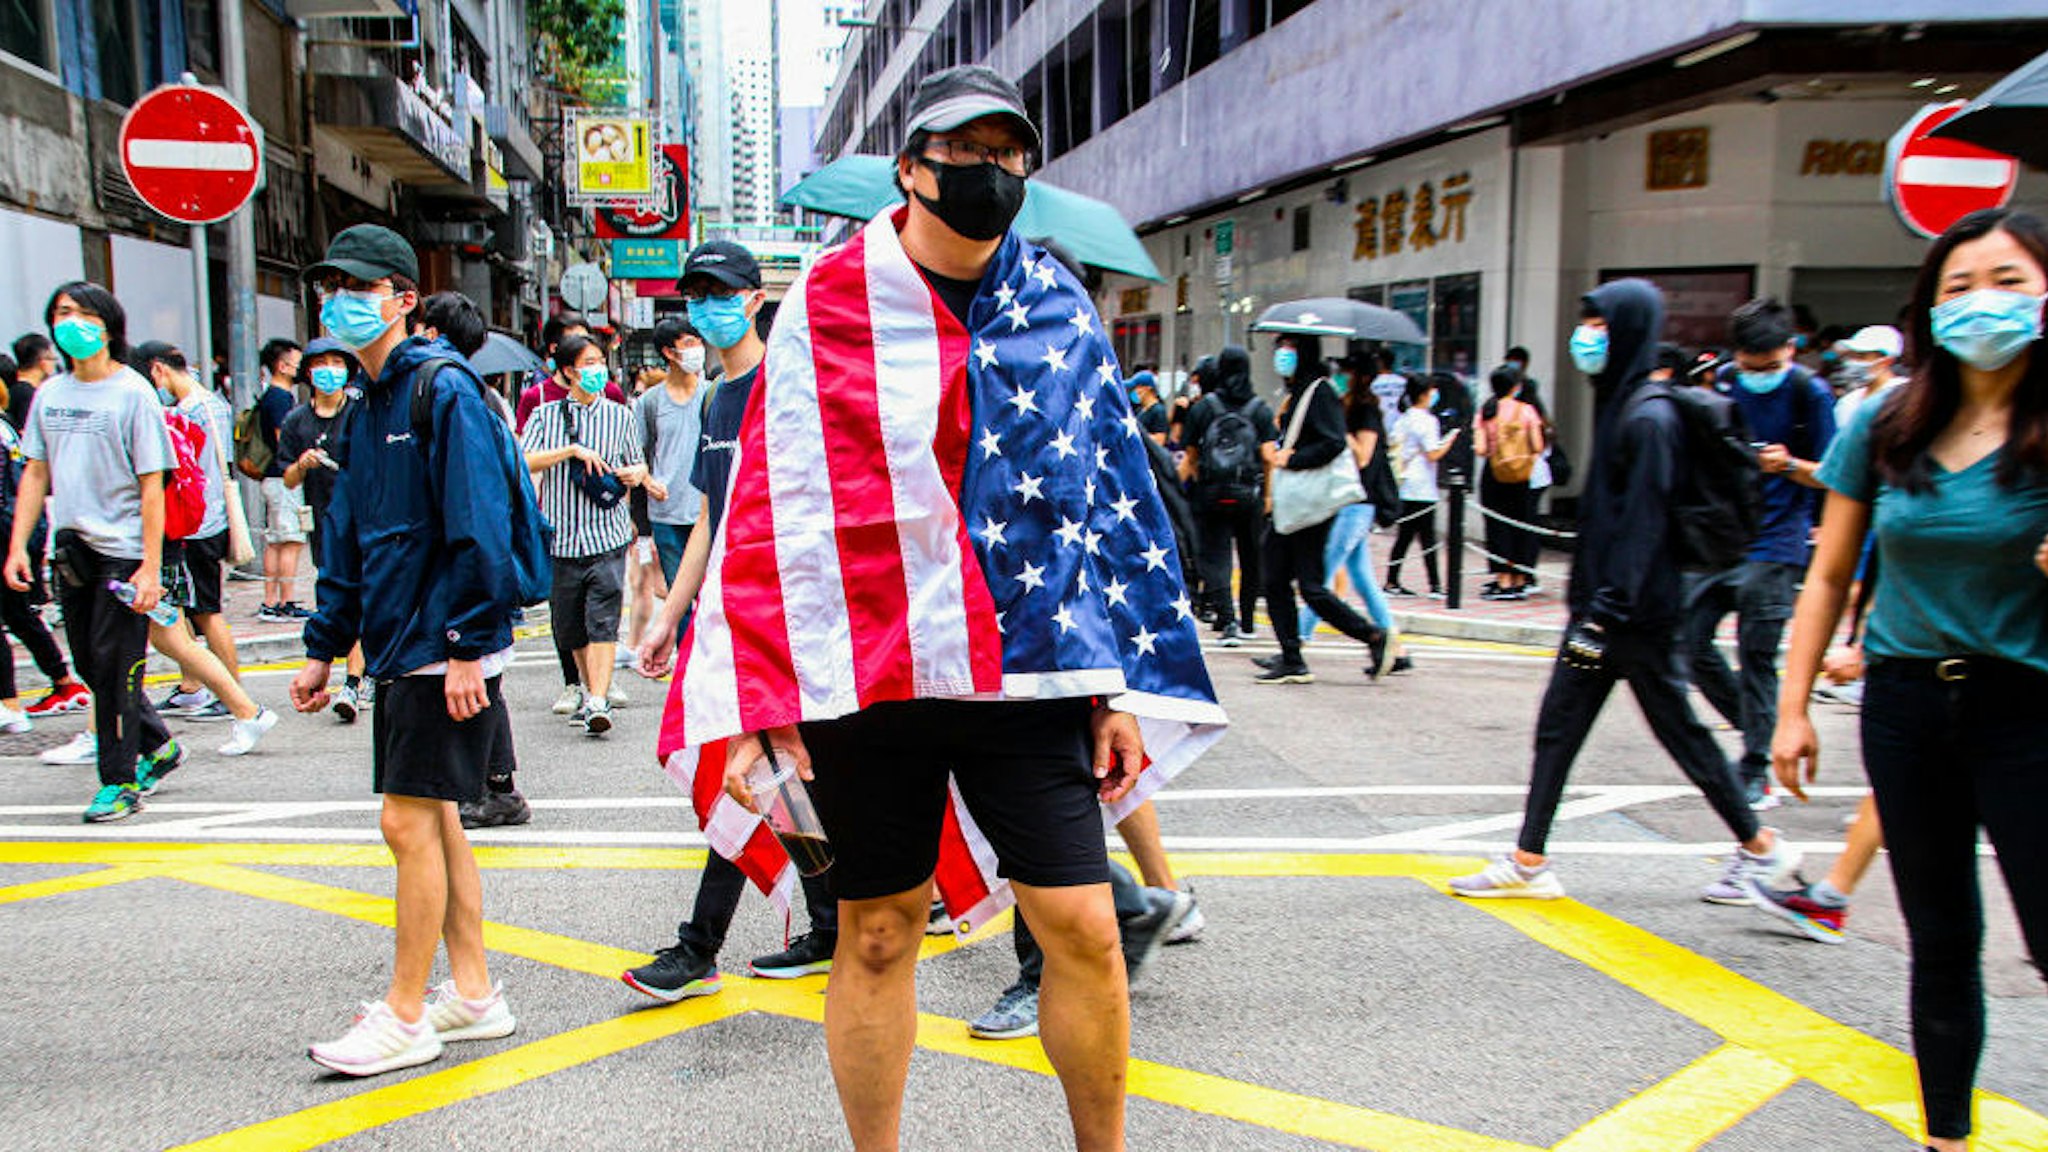 One Hong Kong street protester is draped with the United States of America flag during the 24th May protests in the Causeway Bay district in Hong Kong, China, on Sunday, May 24, 2020. (Photo by Tommy Walker/NurPhoto via Getty Images)